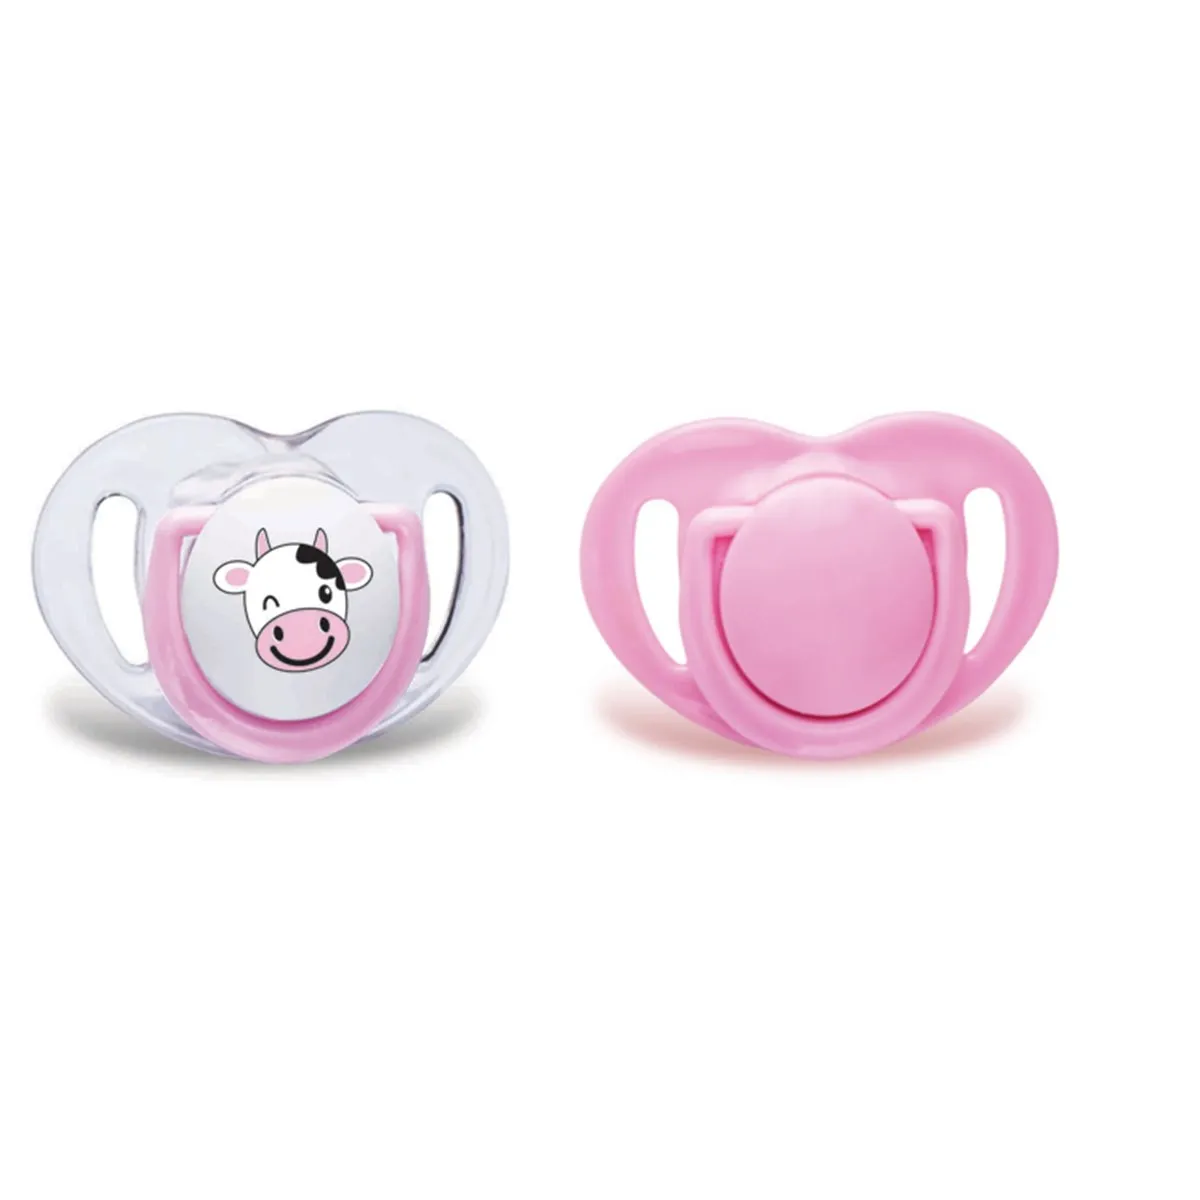 Mamajoo silicone orthodontic double pacifier pink cow/12 months